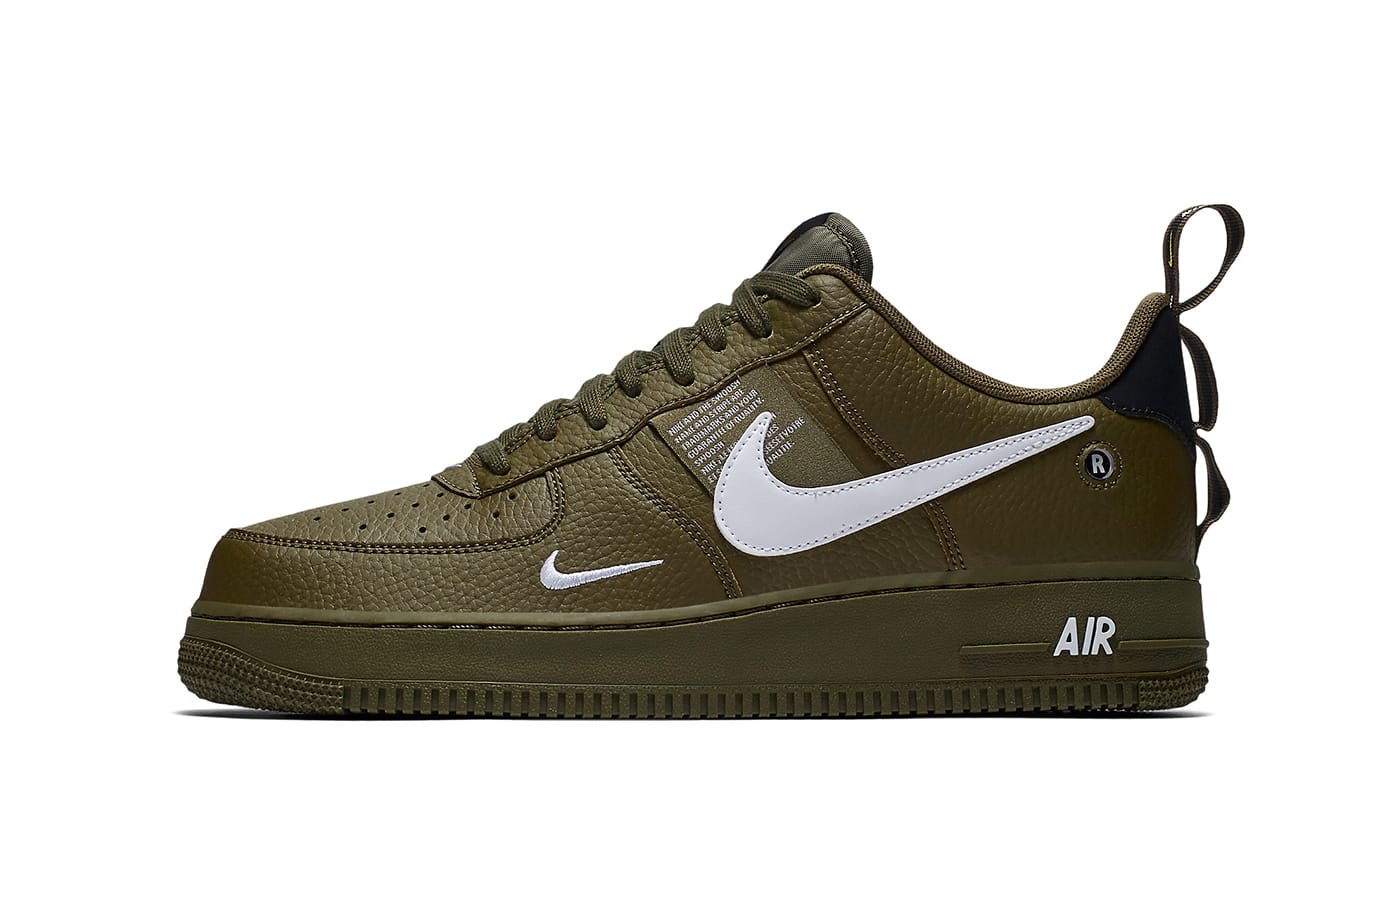 Nike Air Force 1 Low Utility “Olive 